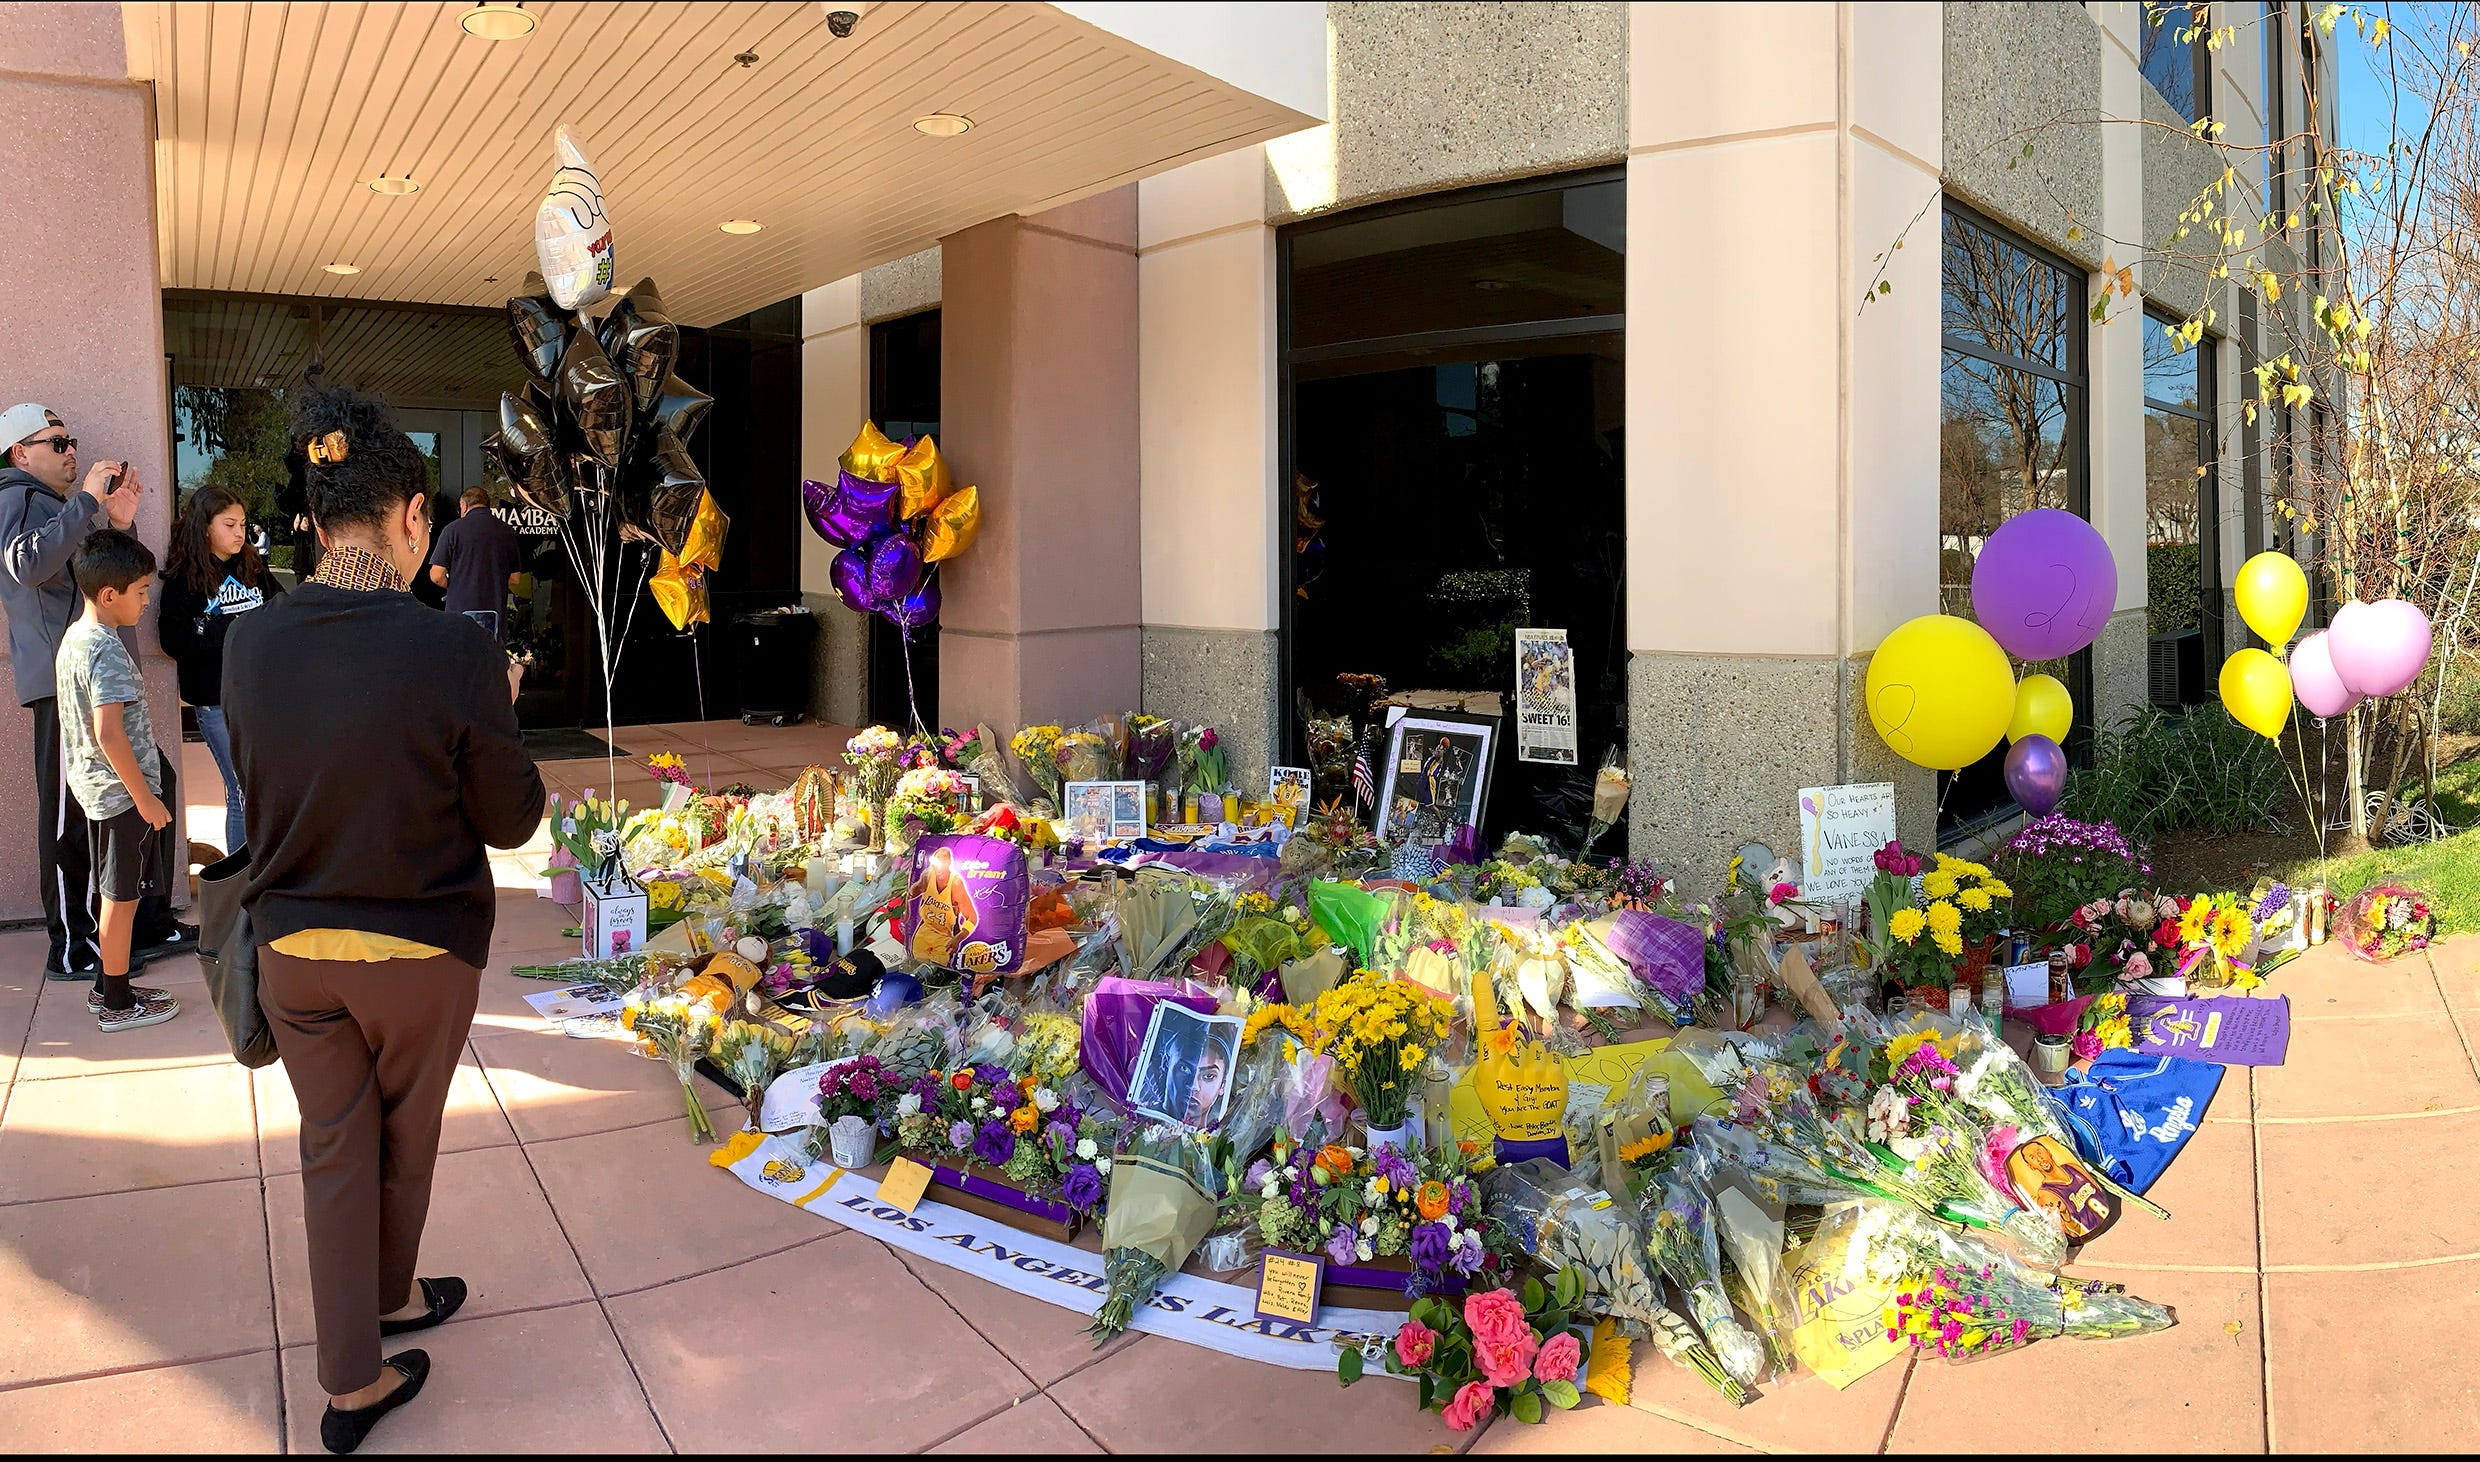 People gather at the Mamba Sports Academy to pay tribute to Kobe Bryant following his death.